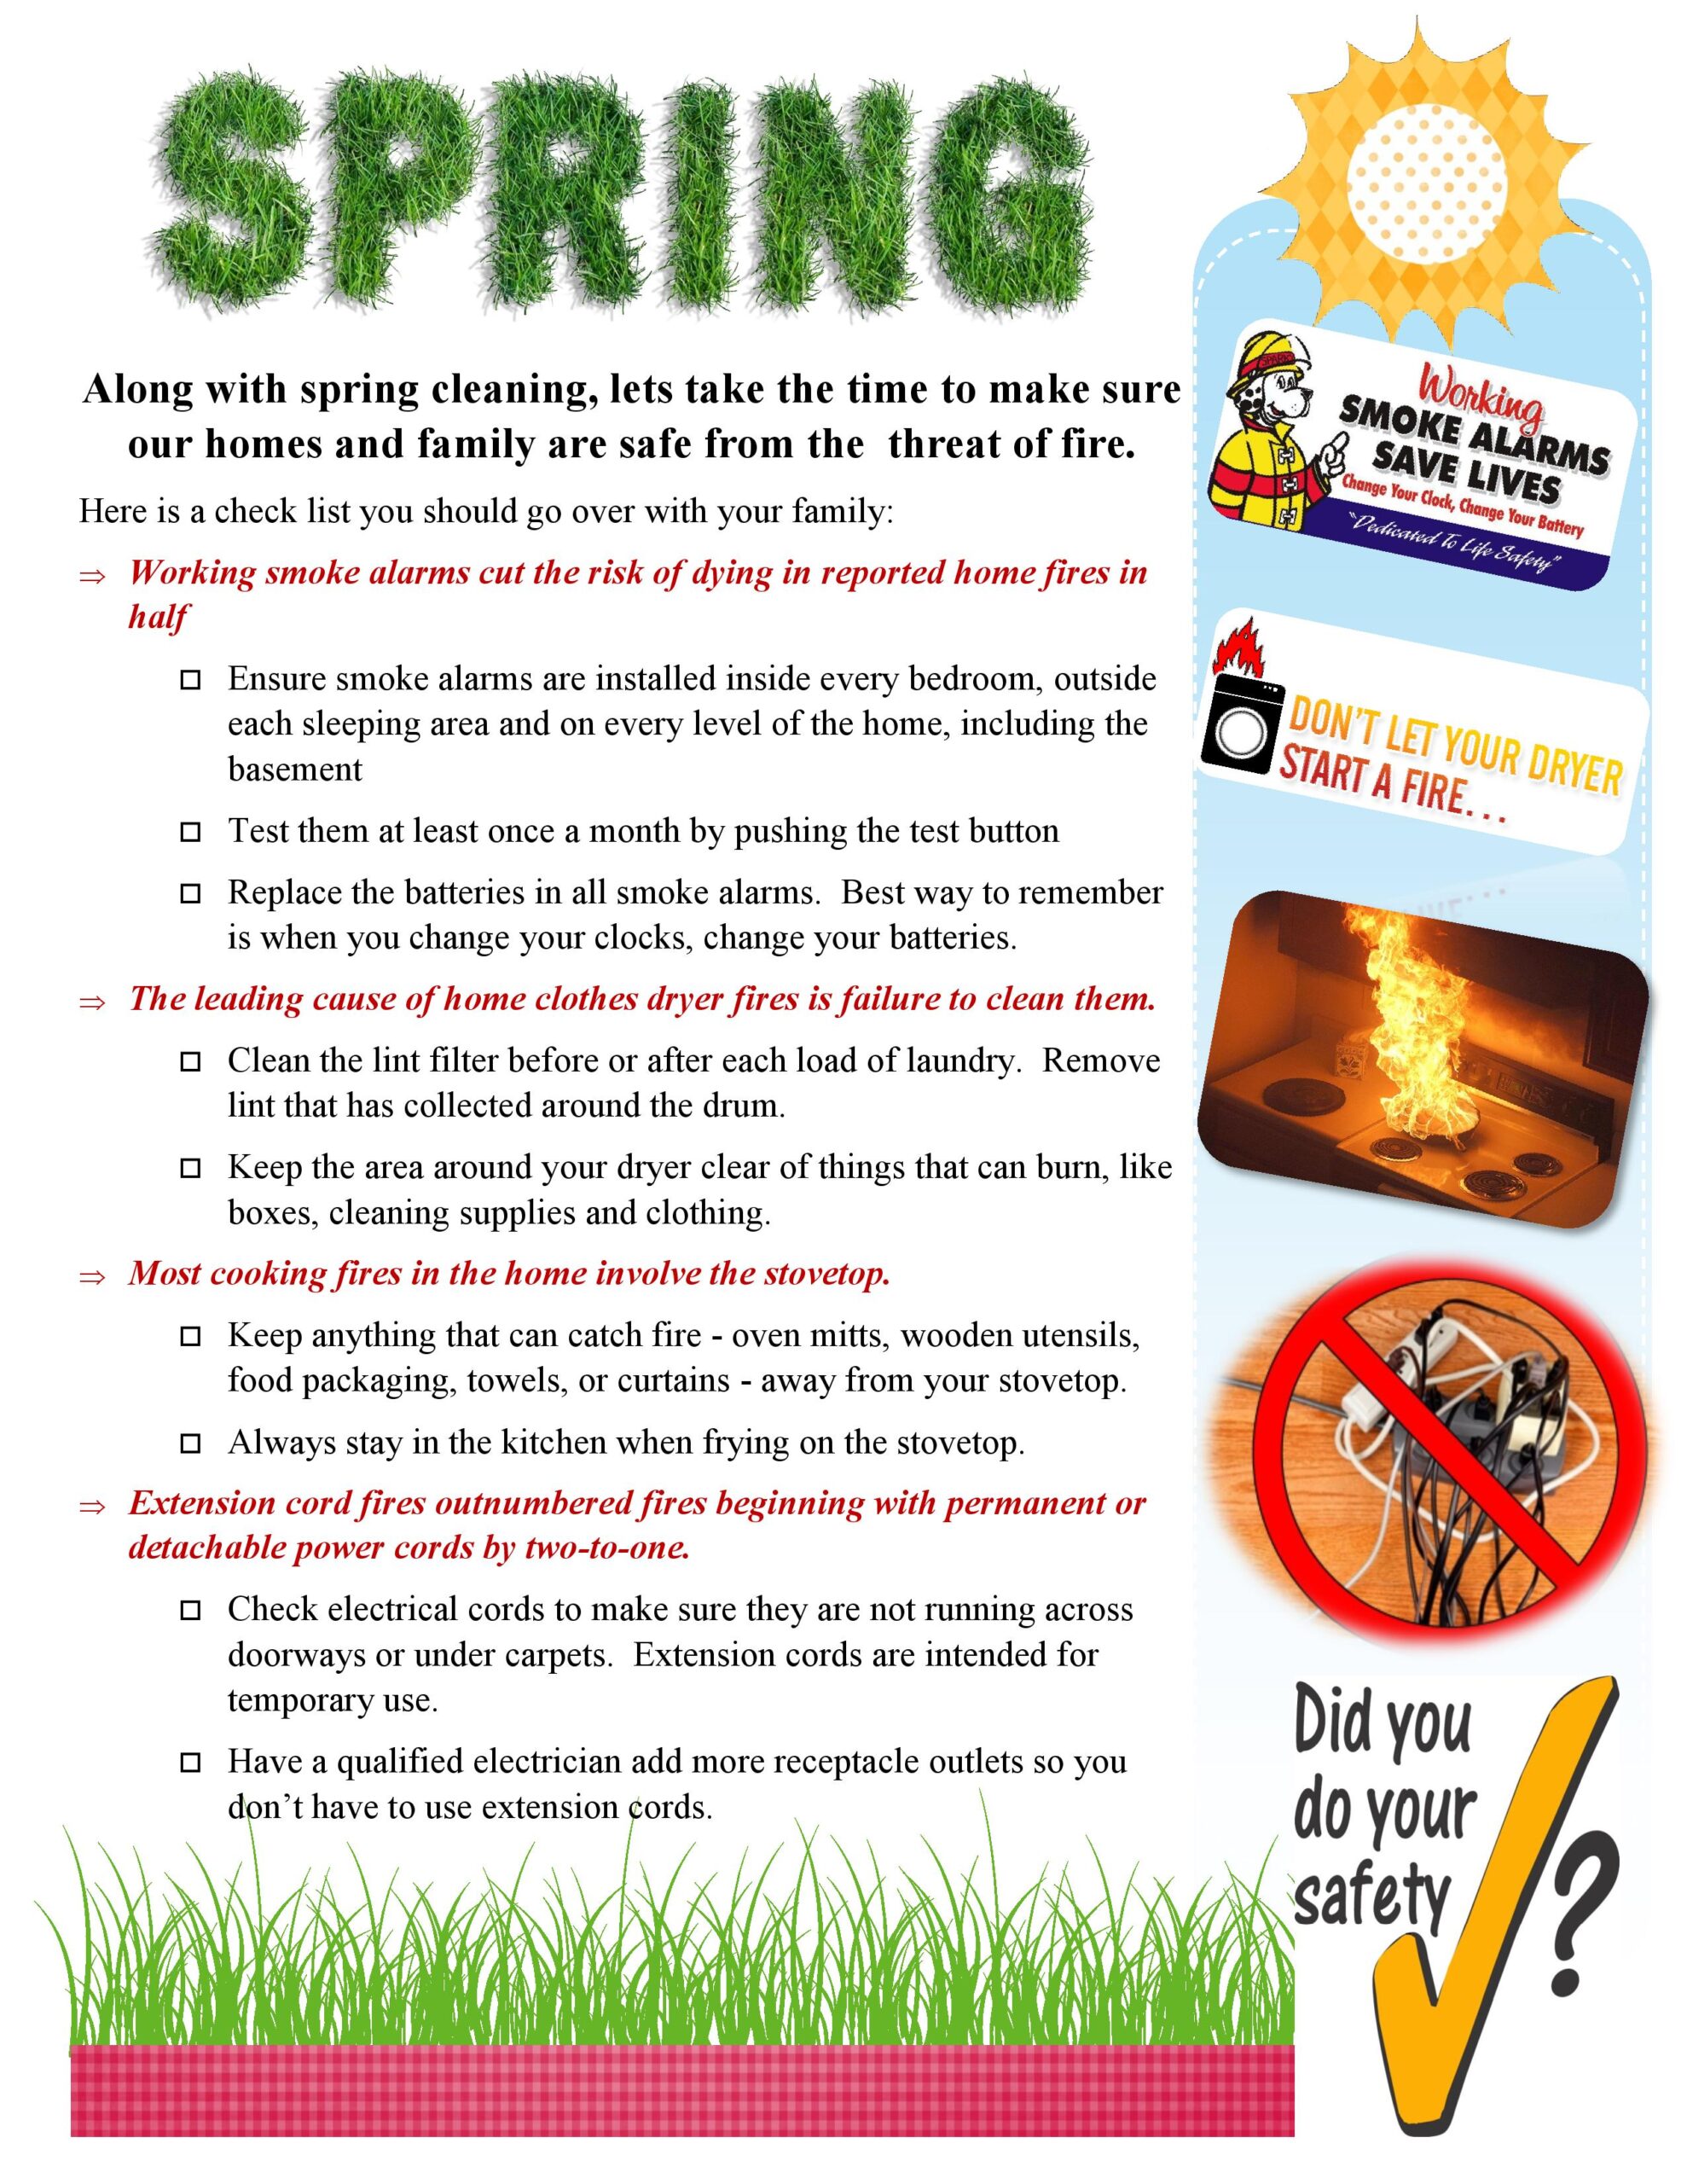 30 spring safety tips for the workplace